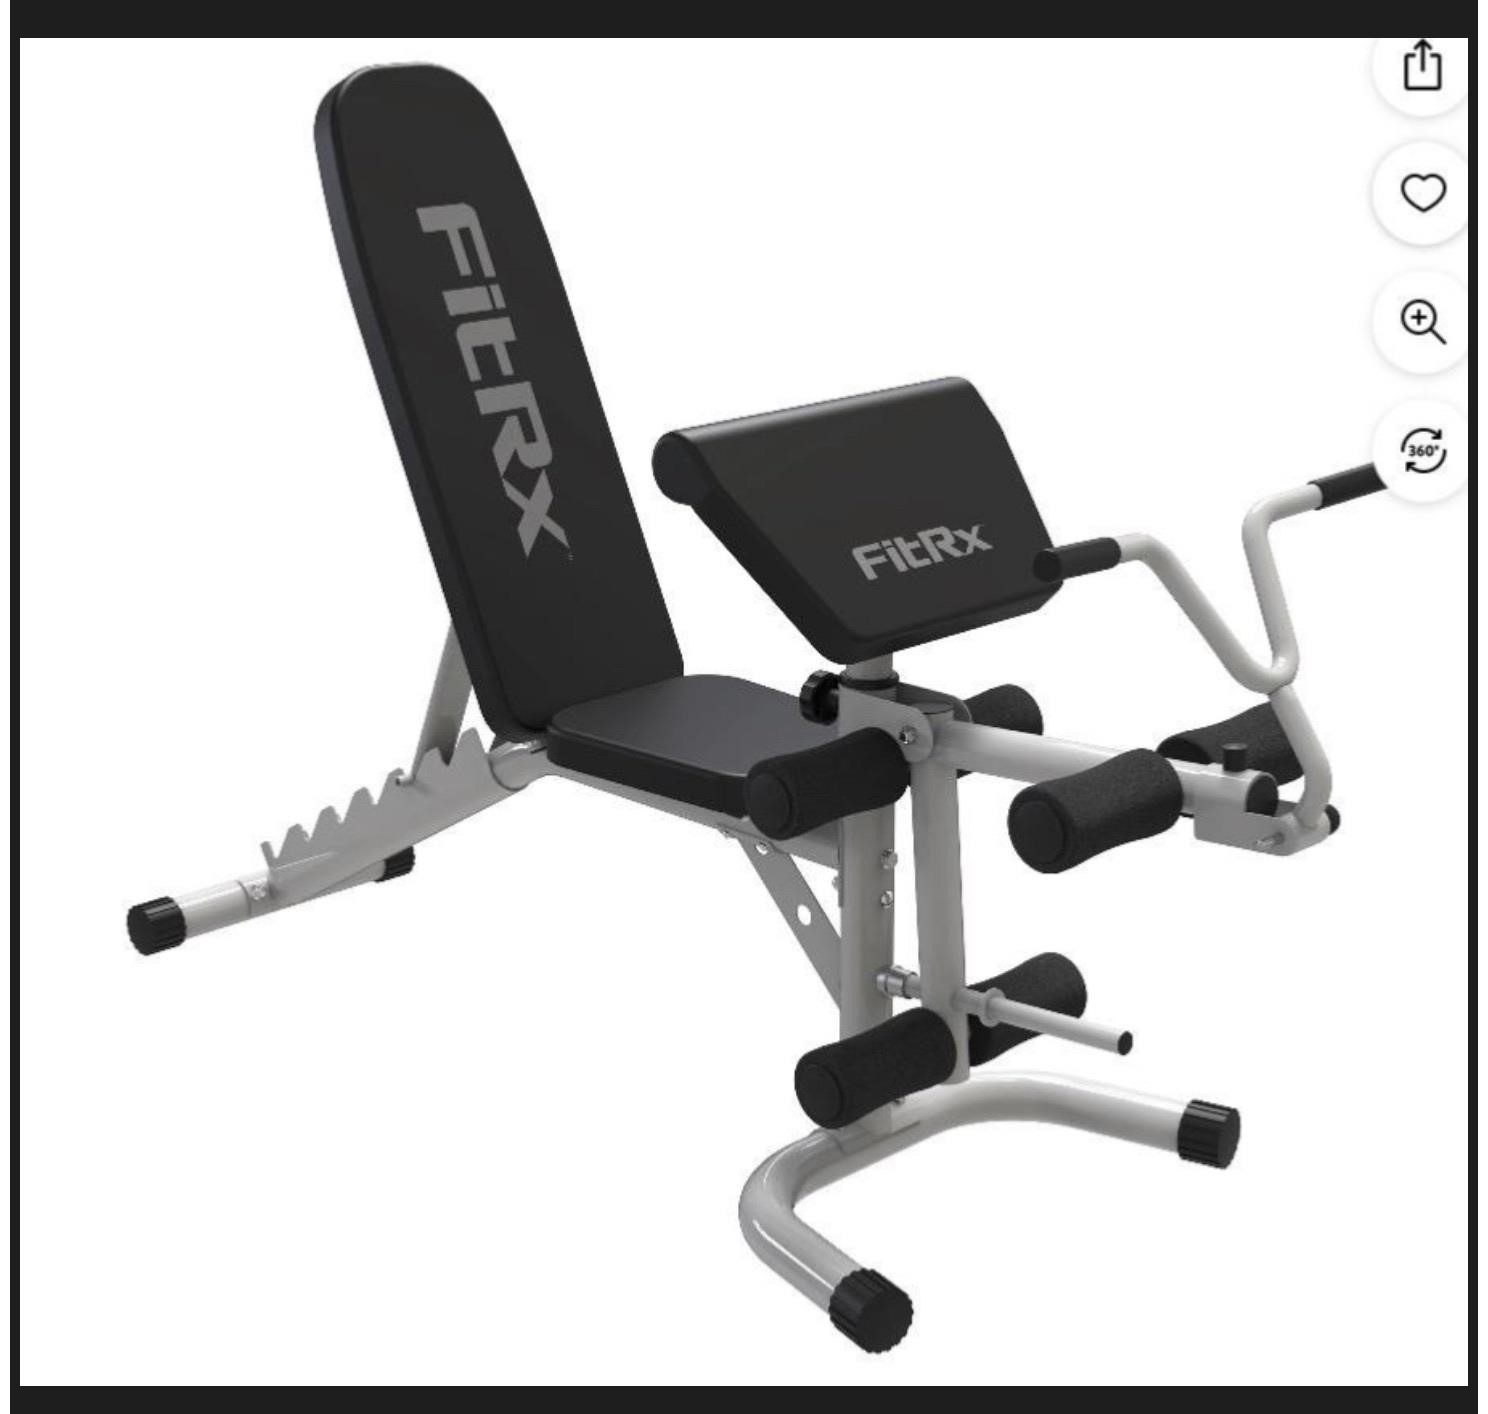 FitRx Workout Bench, Fitness Weight Bench